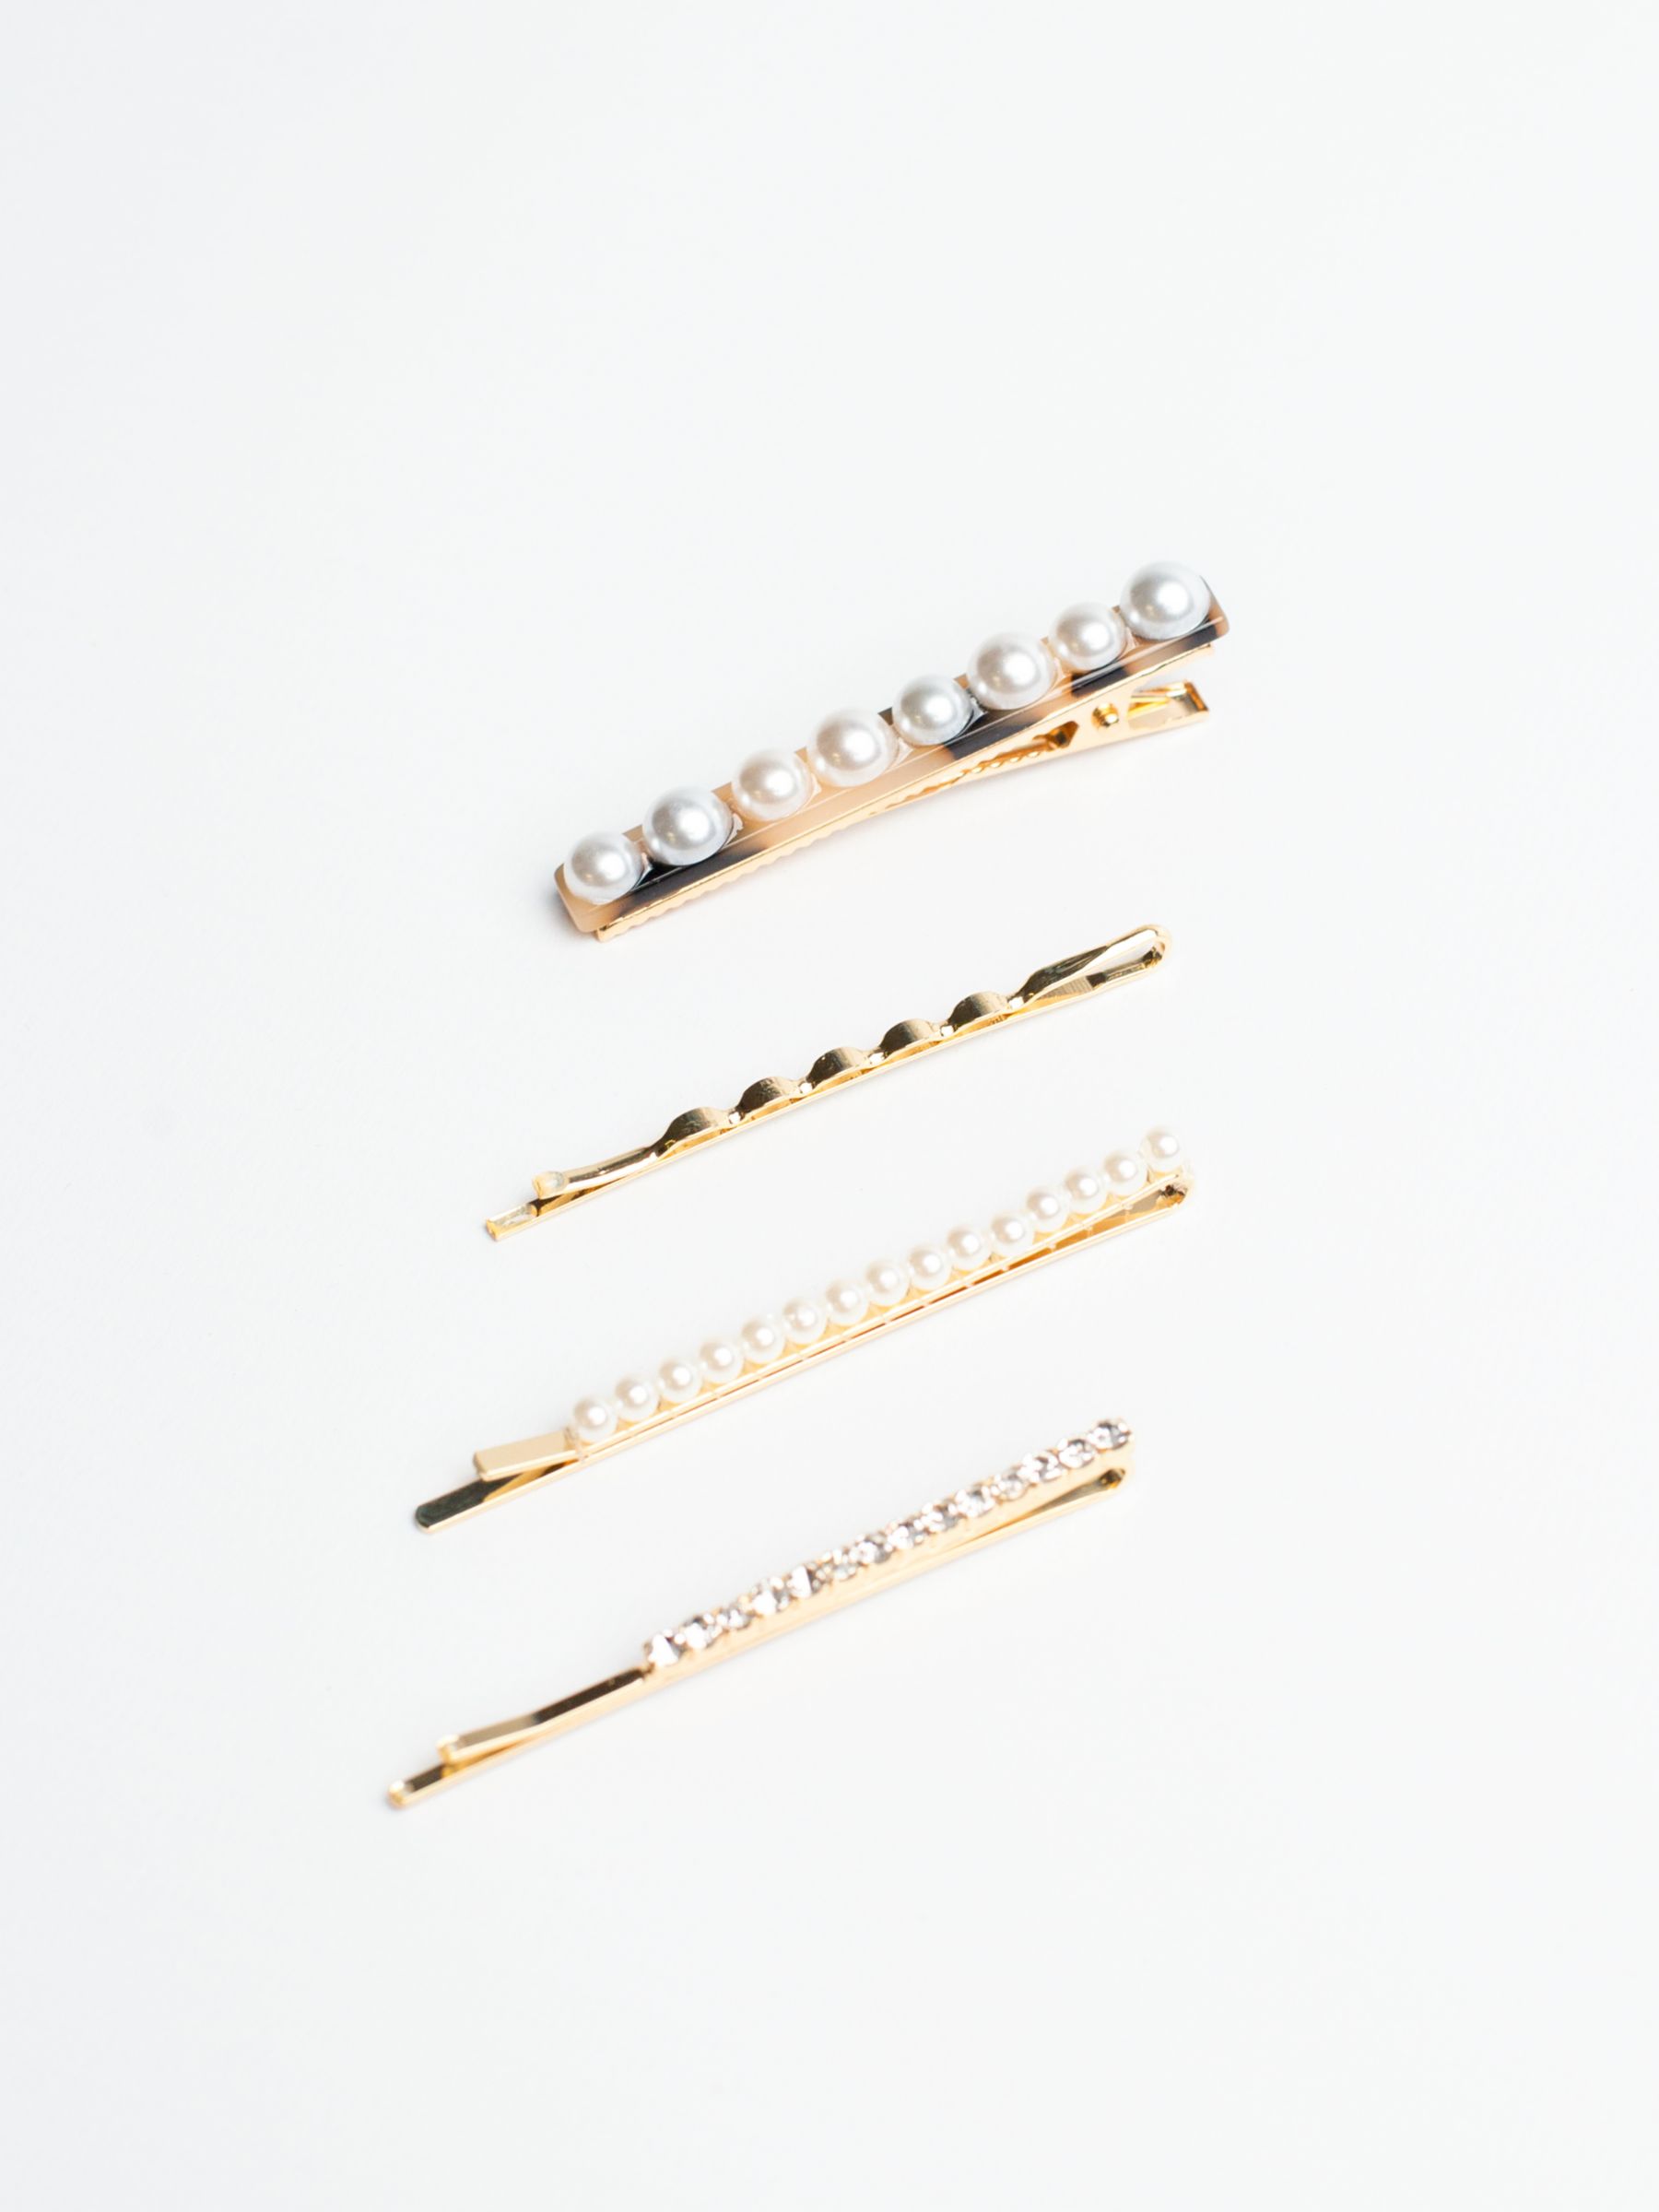 Buy Bloom & Bay Bluebell Pearl & Crystal Hair Clips, Pack of 4, Gold Online at johnlewis.com